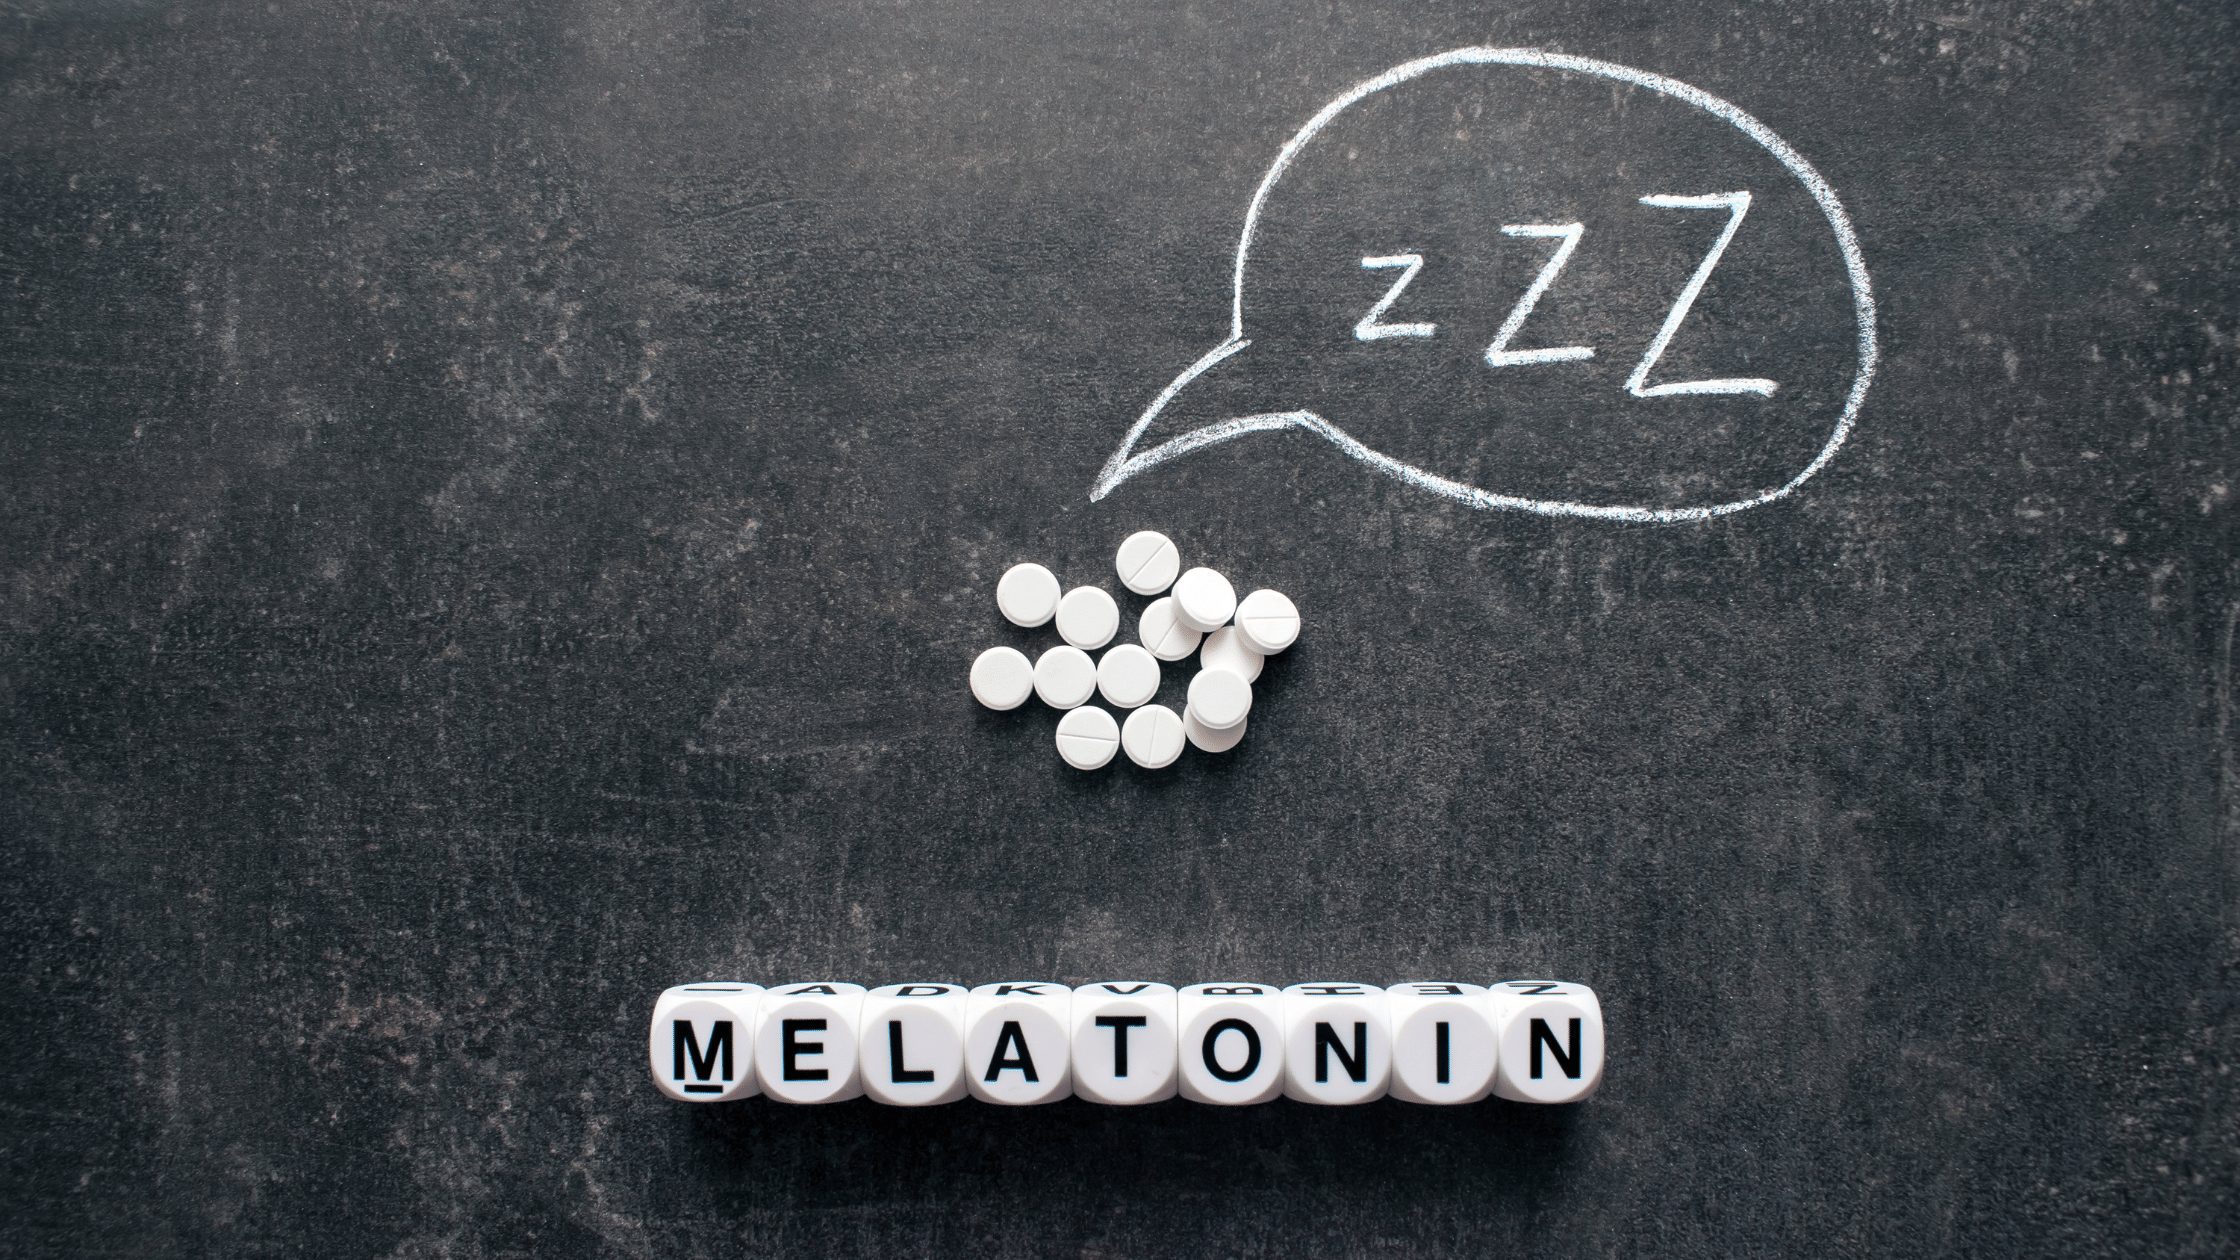 melatonin spelled out with dice on a chalkboard background